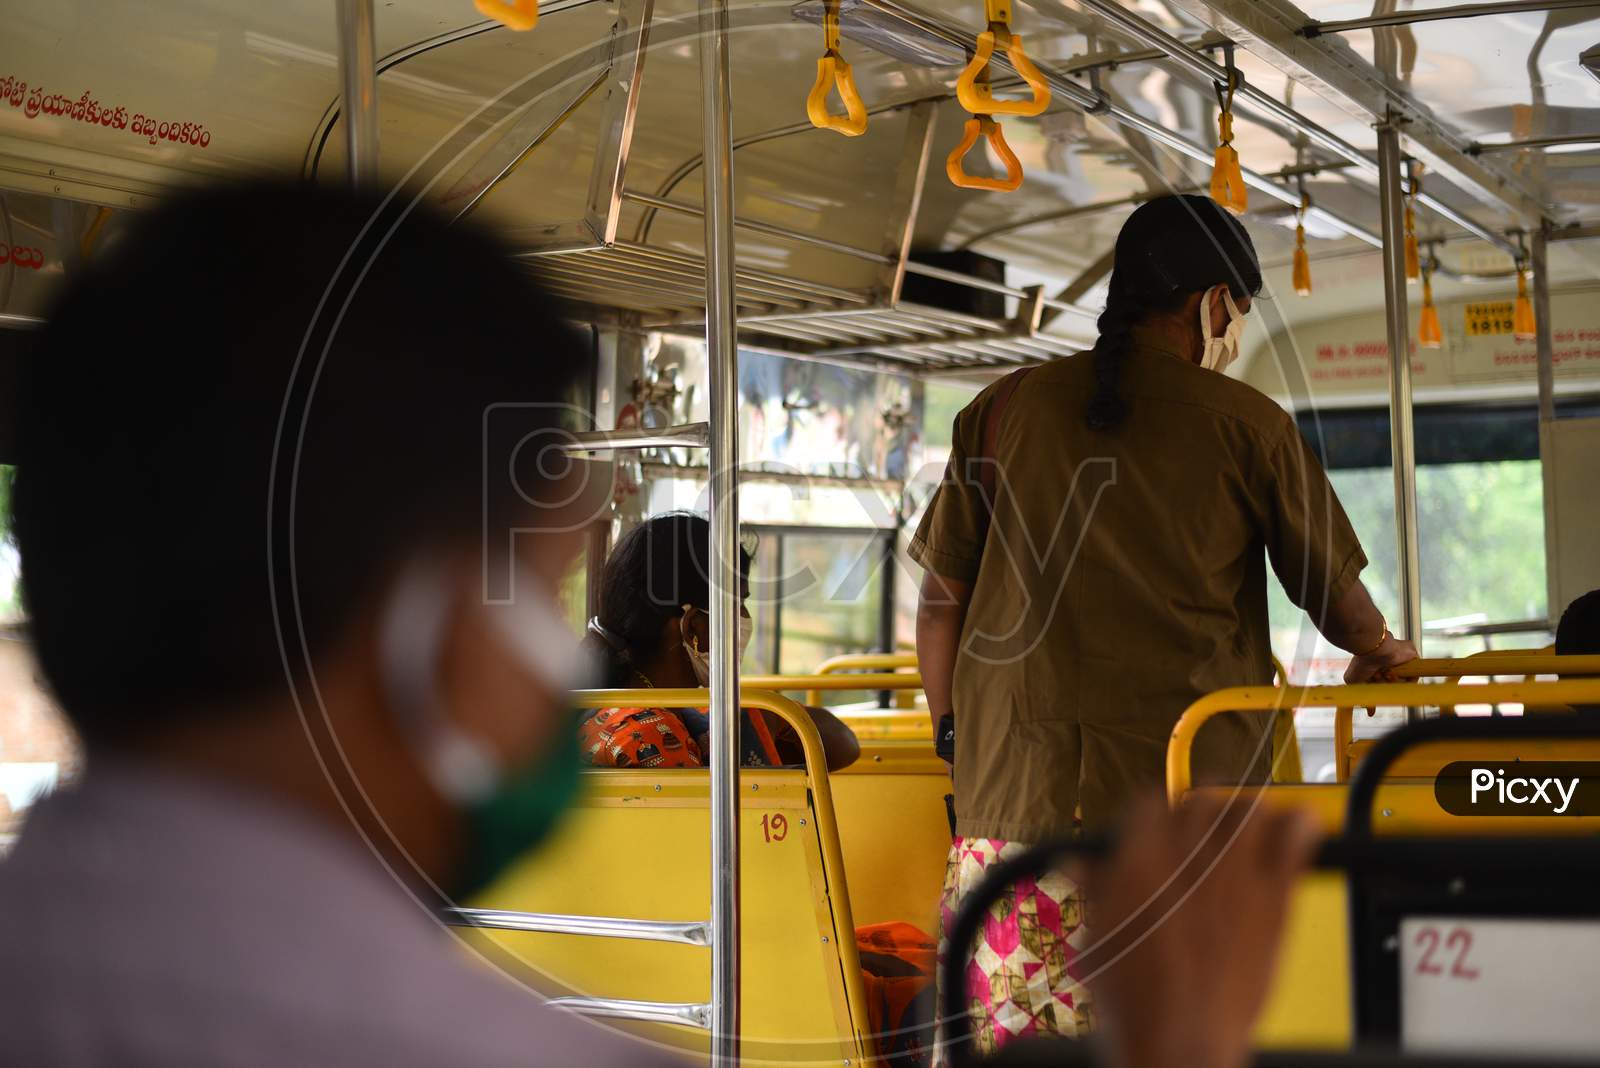 TSRTC resumes bus service from 19 May 2020 after easing the lockdown guidelines.